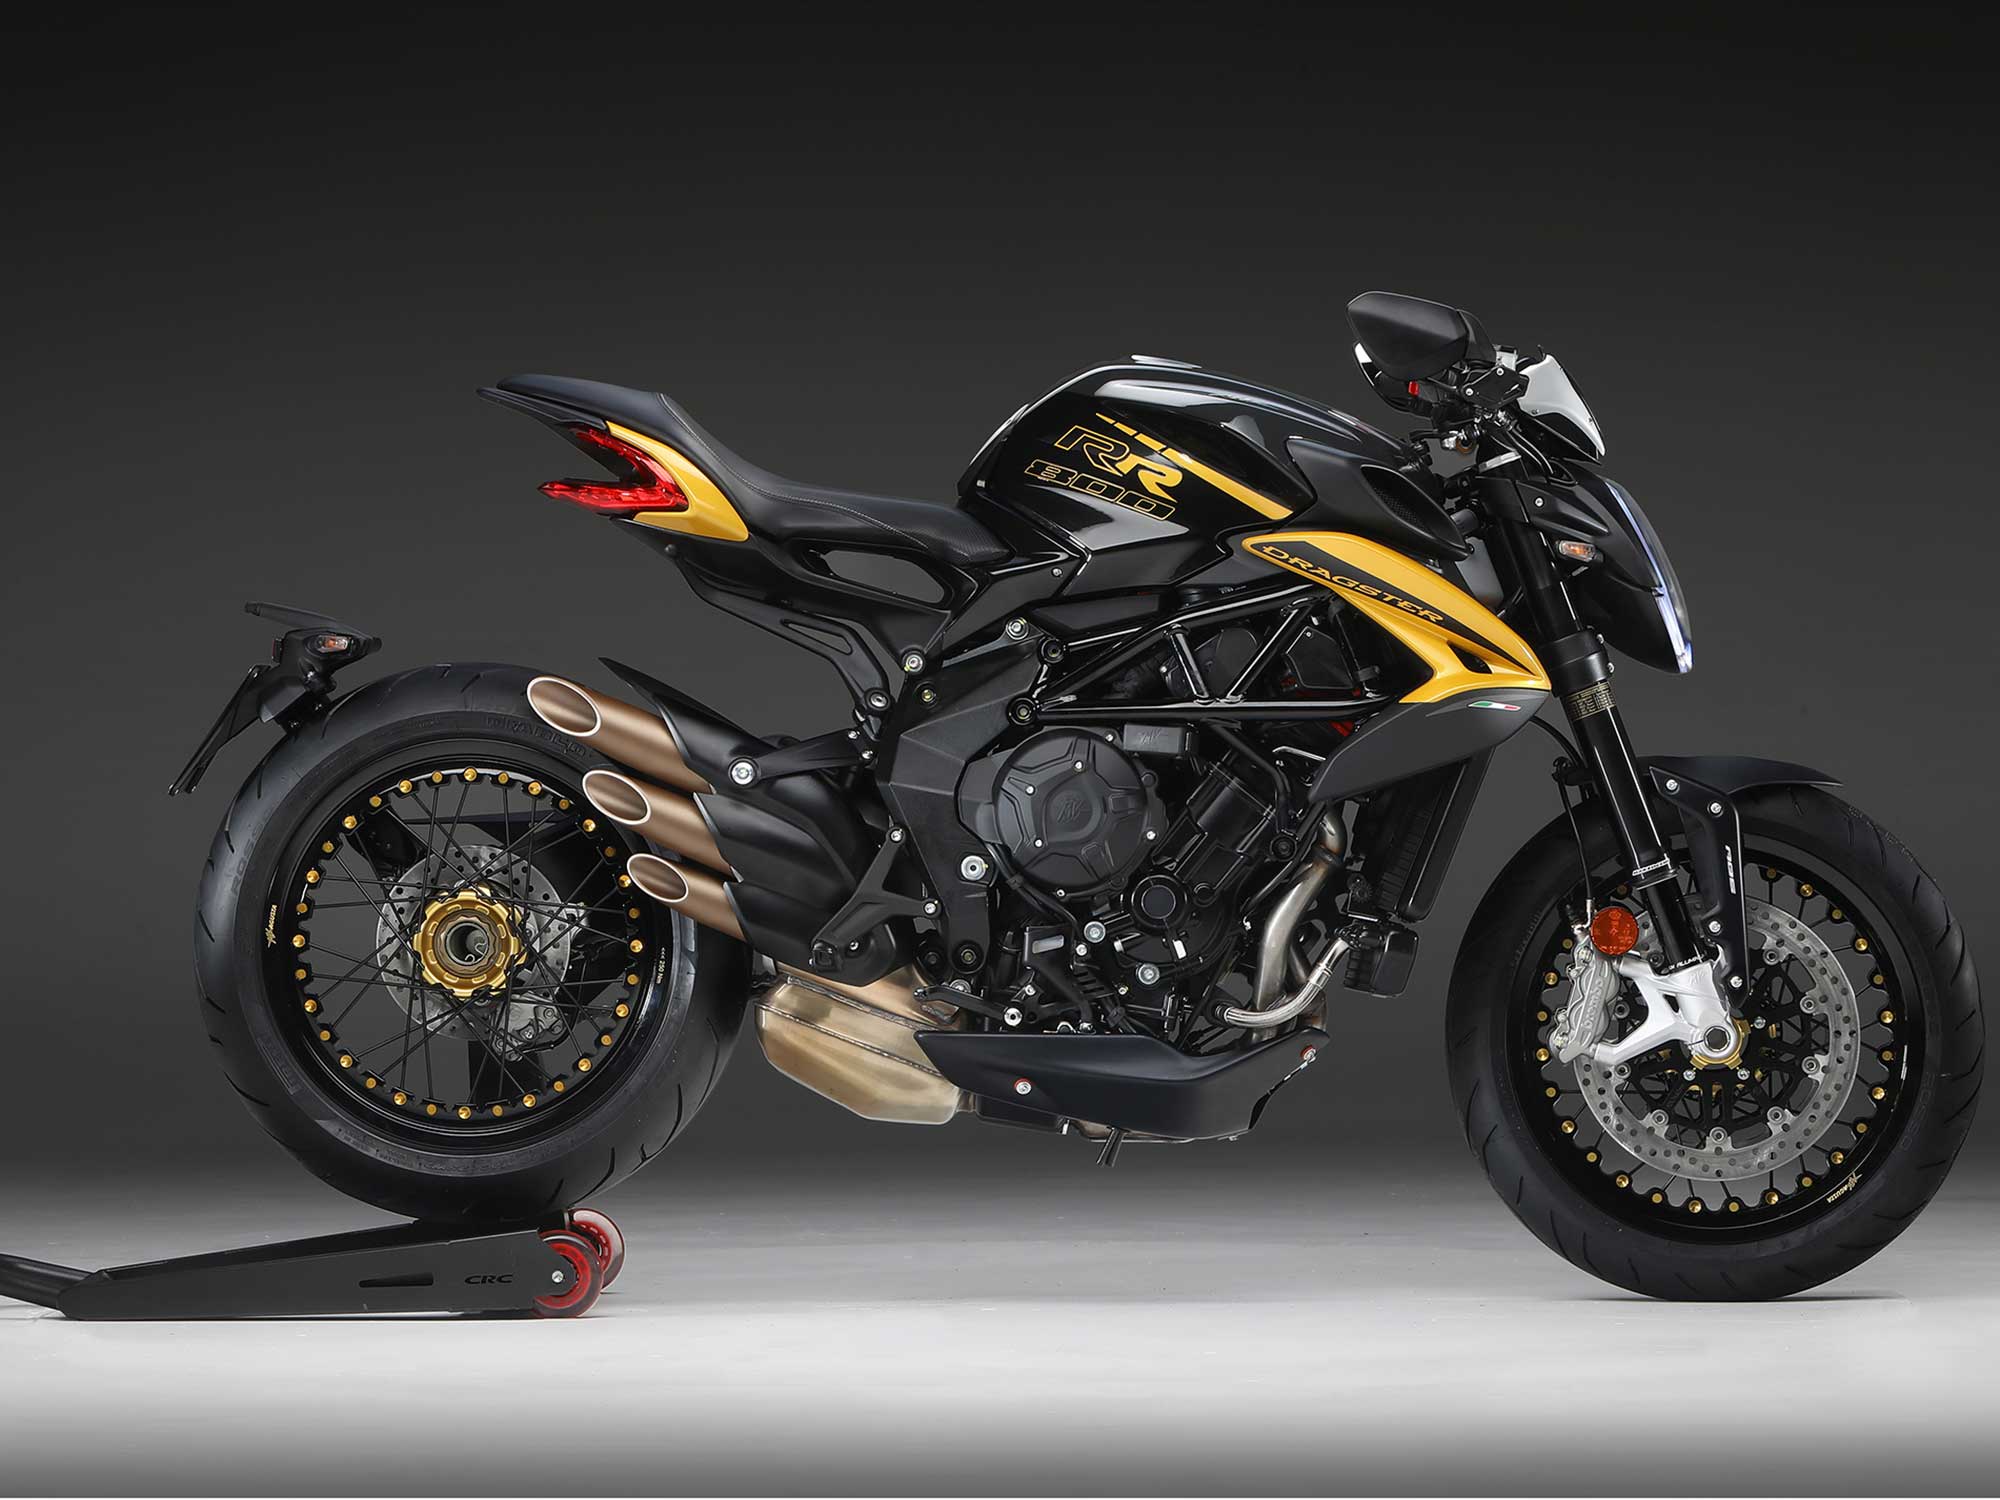 2020 MV Agusta Dragster 800 RR Buyer's Guide: Specs, Photos, Price